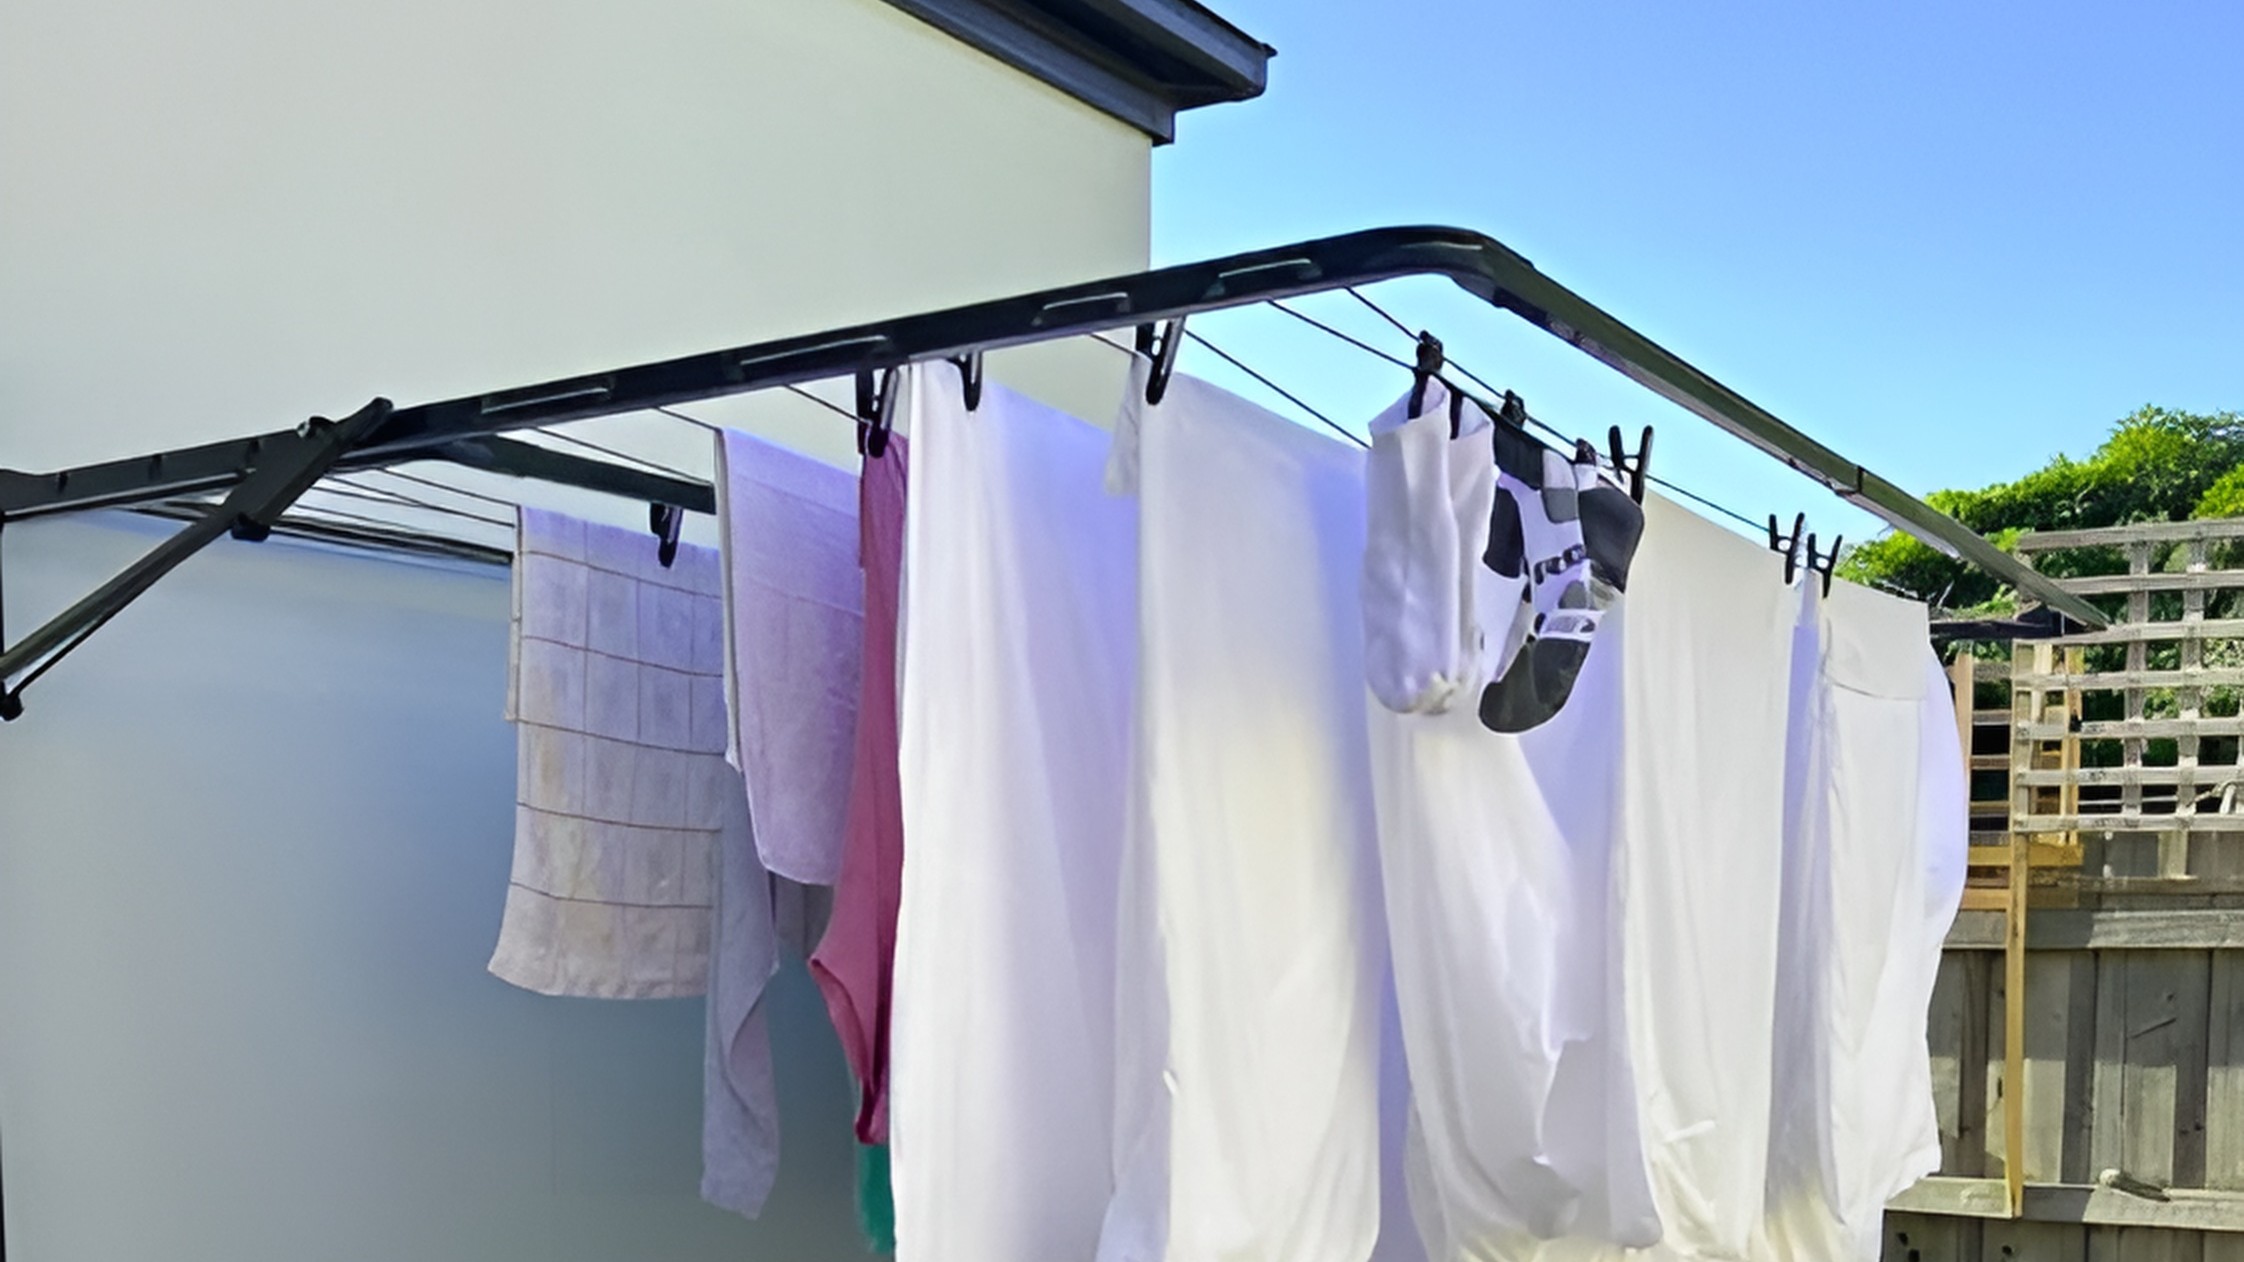 Folding Wall Clothes Line Final Words